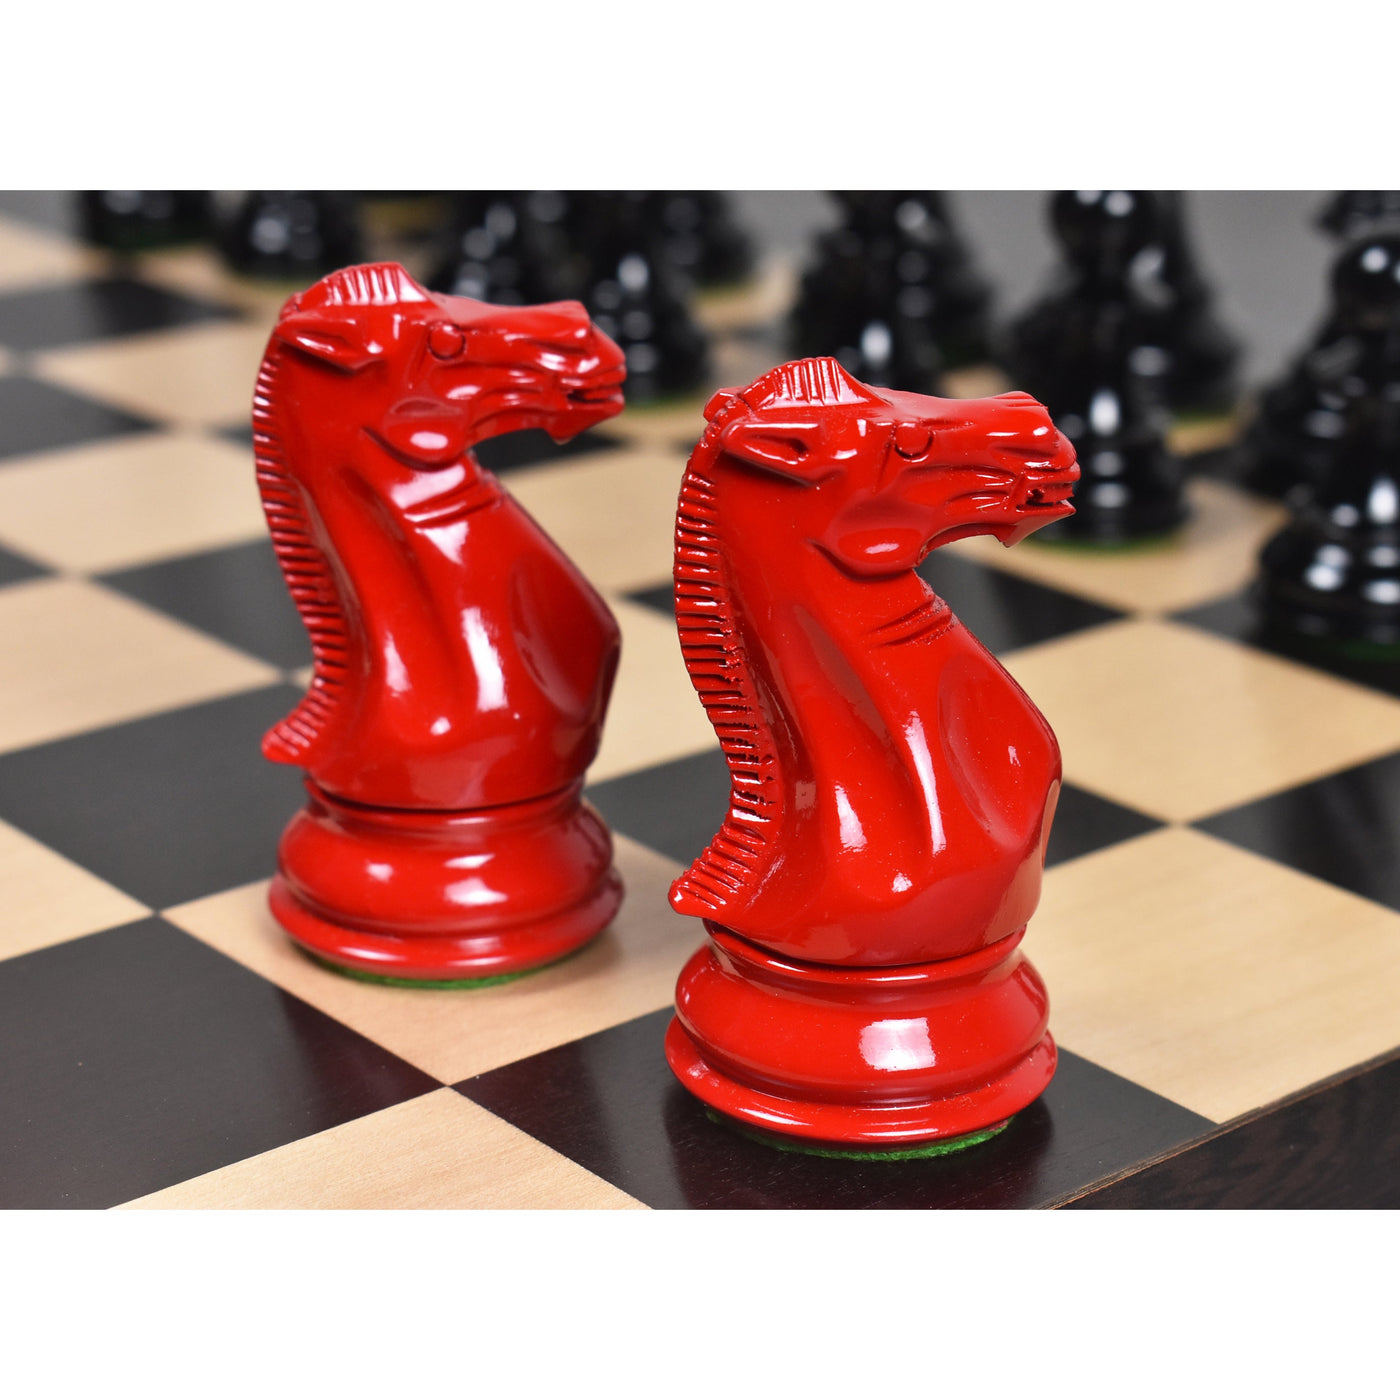 4.1" Pro Staunton Weighted Red & Black Painted Wooden Chess Pieces with Borderless 55 mm Square Chess board in Solid Ebony & Maple Wood and Leatherette Coffer Storage Box